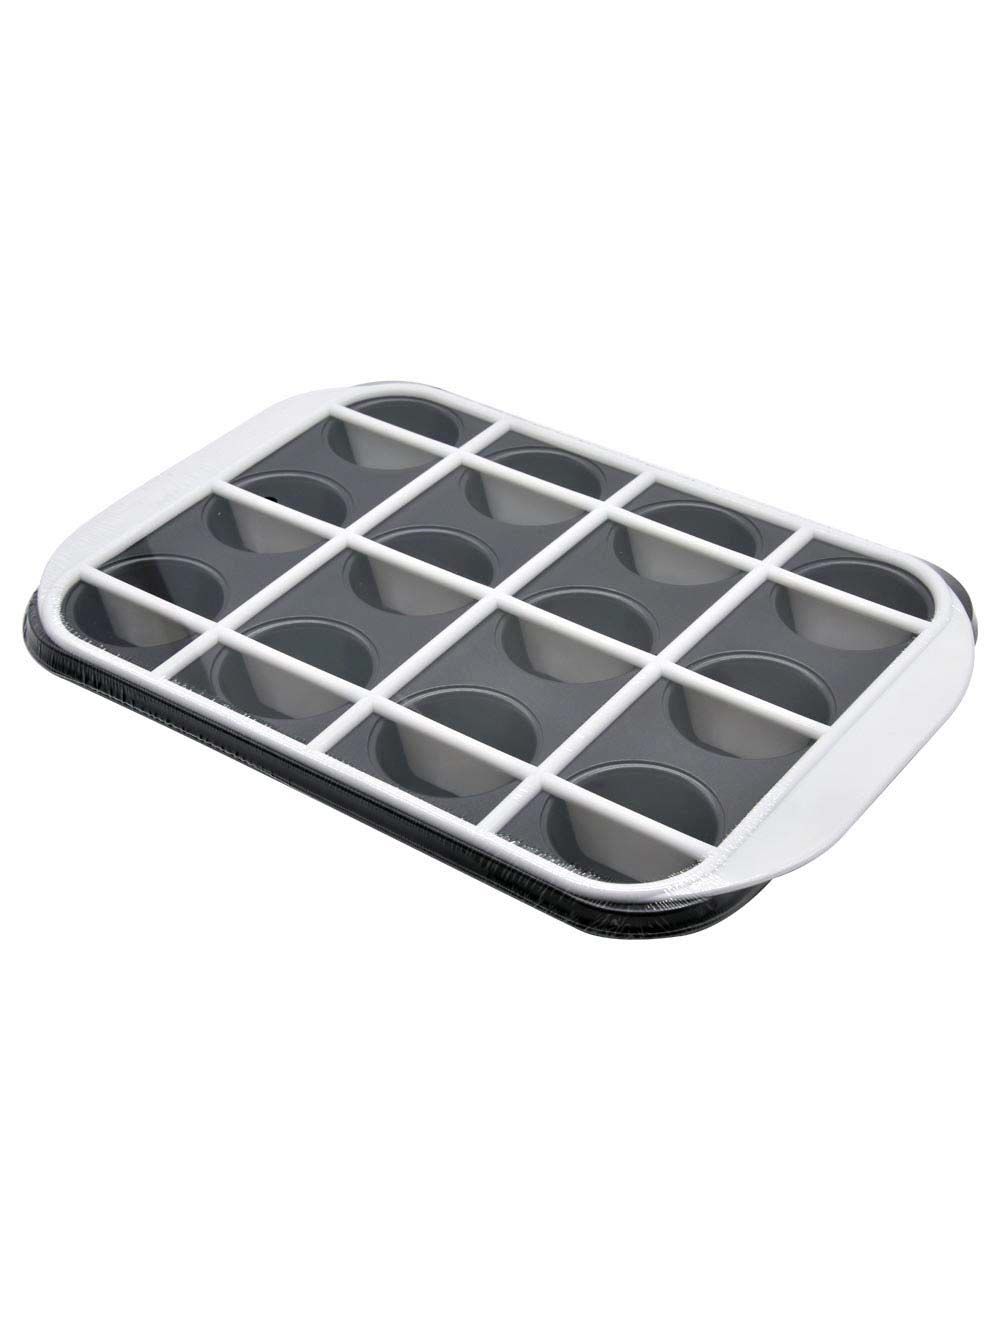 12-Cup Muffin Pan 38.5x27x4.5 cm